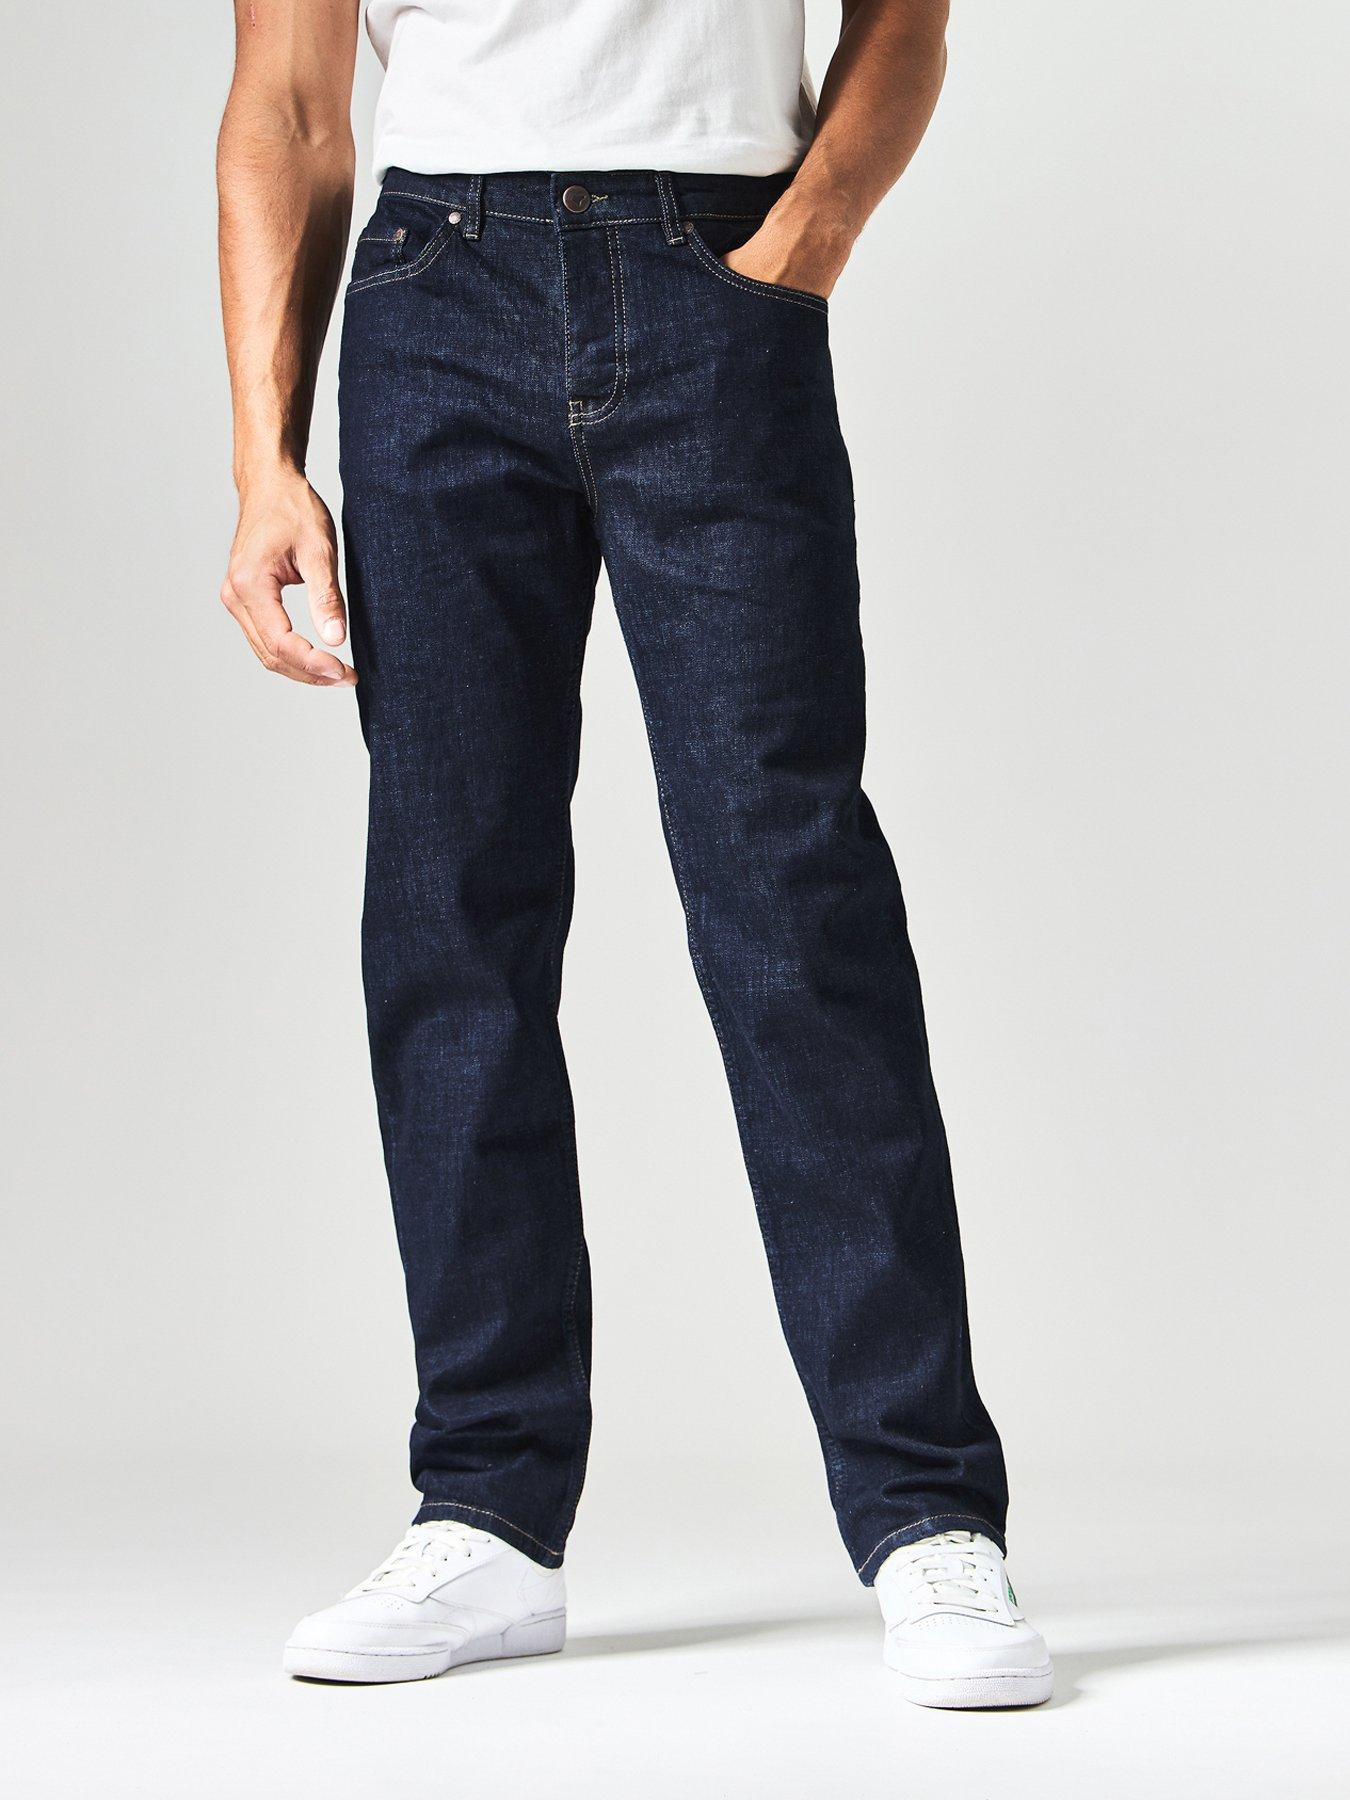 Levi's 517 Straight Bootcut Jeans - Make It Yours - Dark Blue